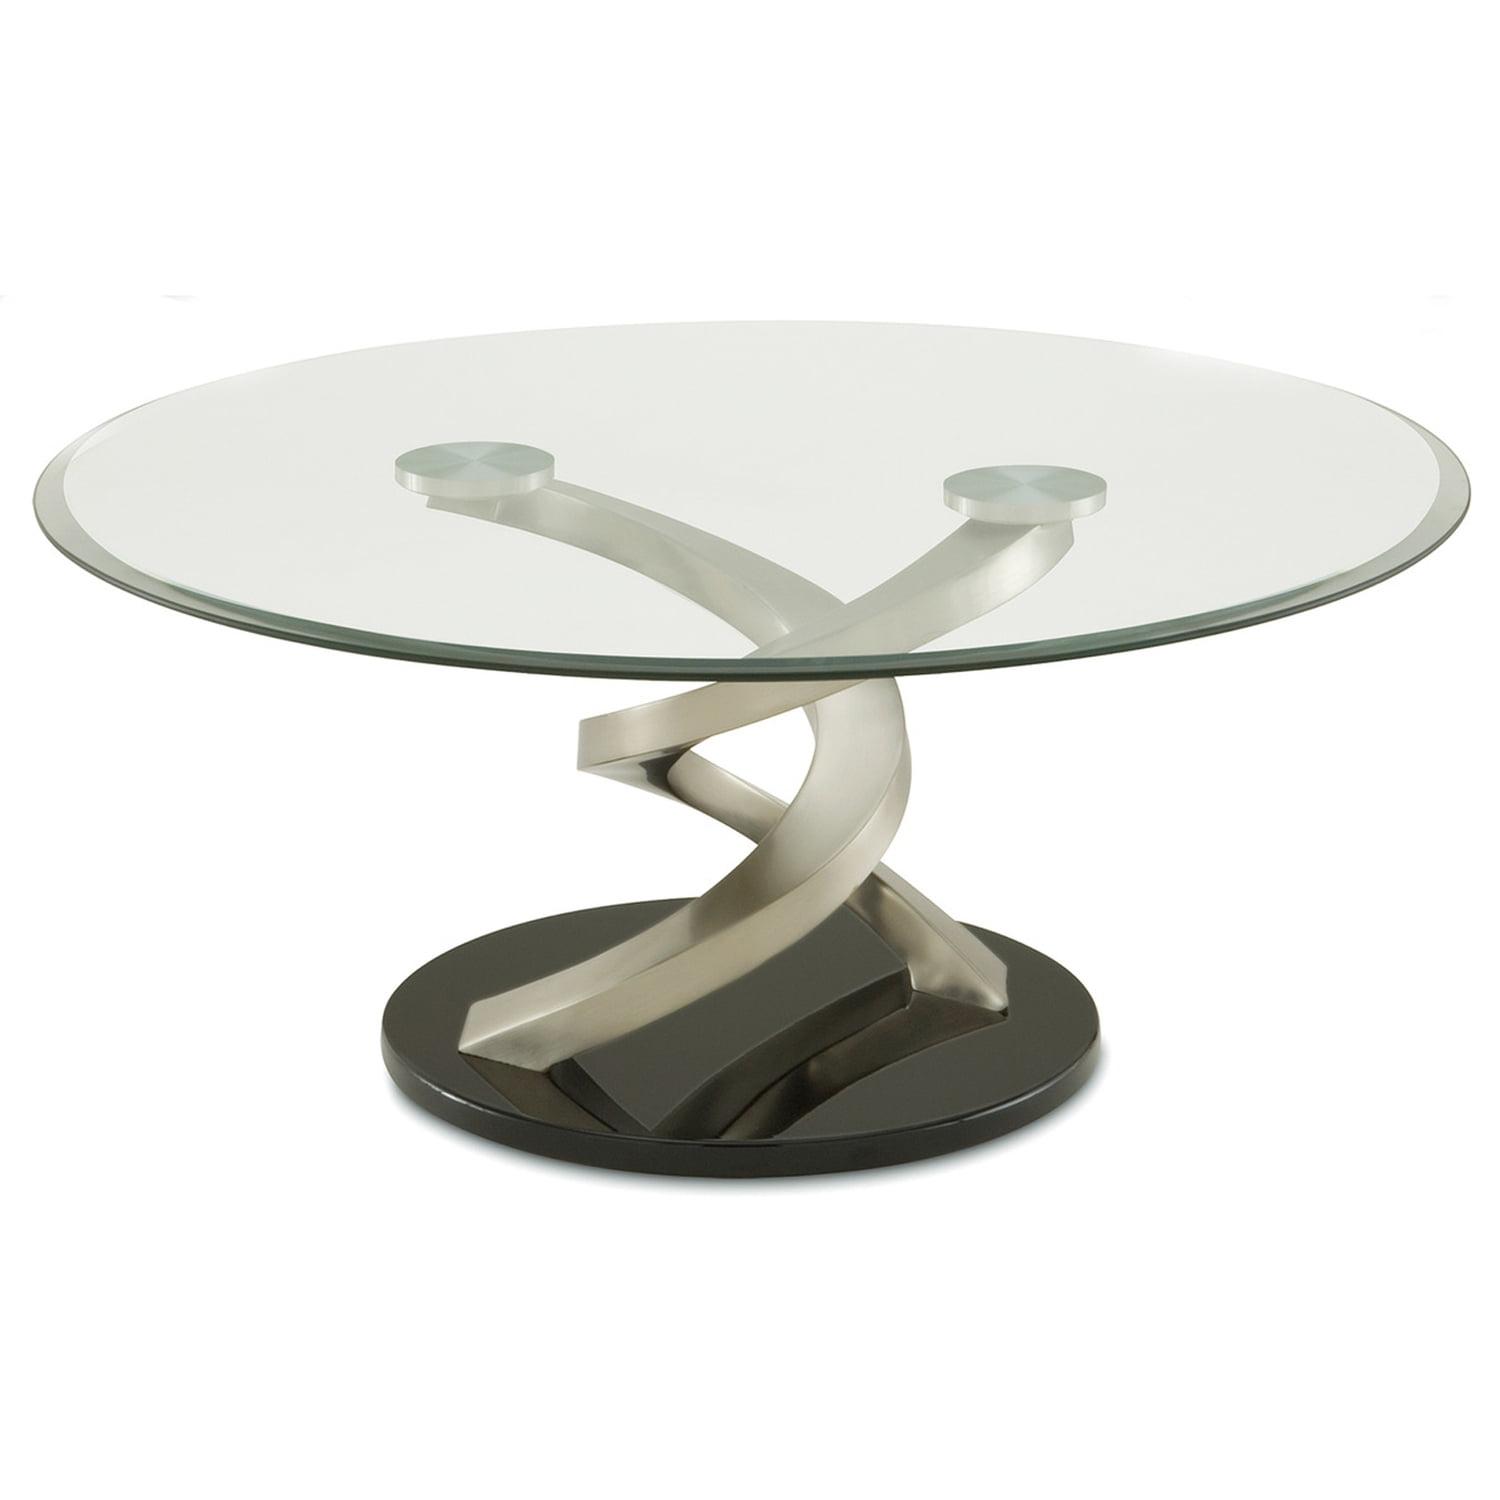 Luxurious 38" Round Glass Coffee Table with Silver Twisted Metal Base